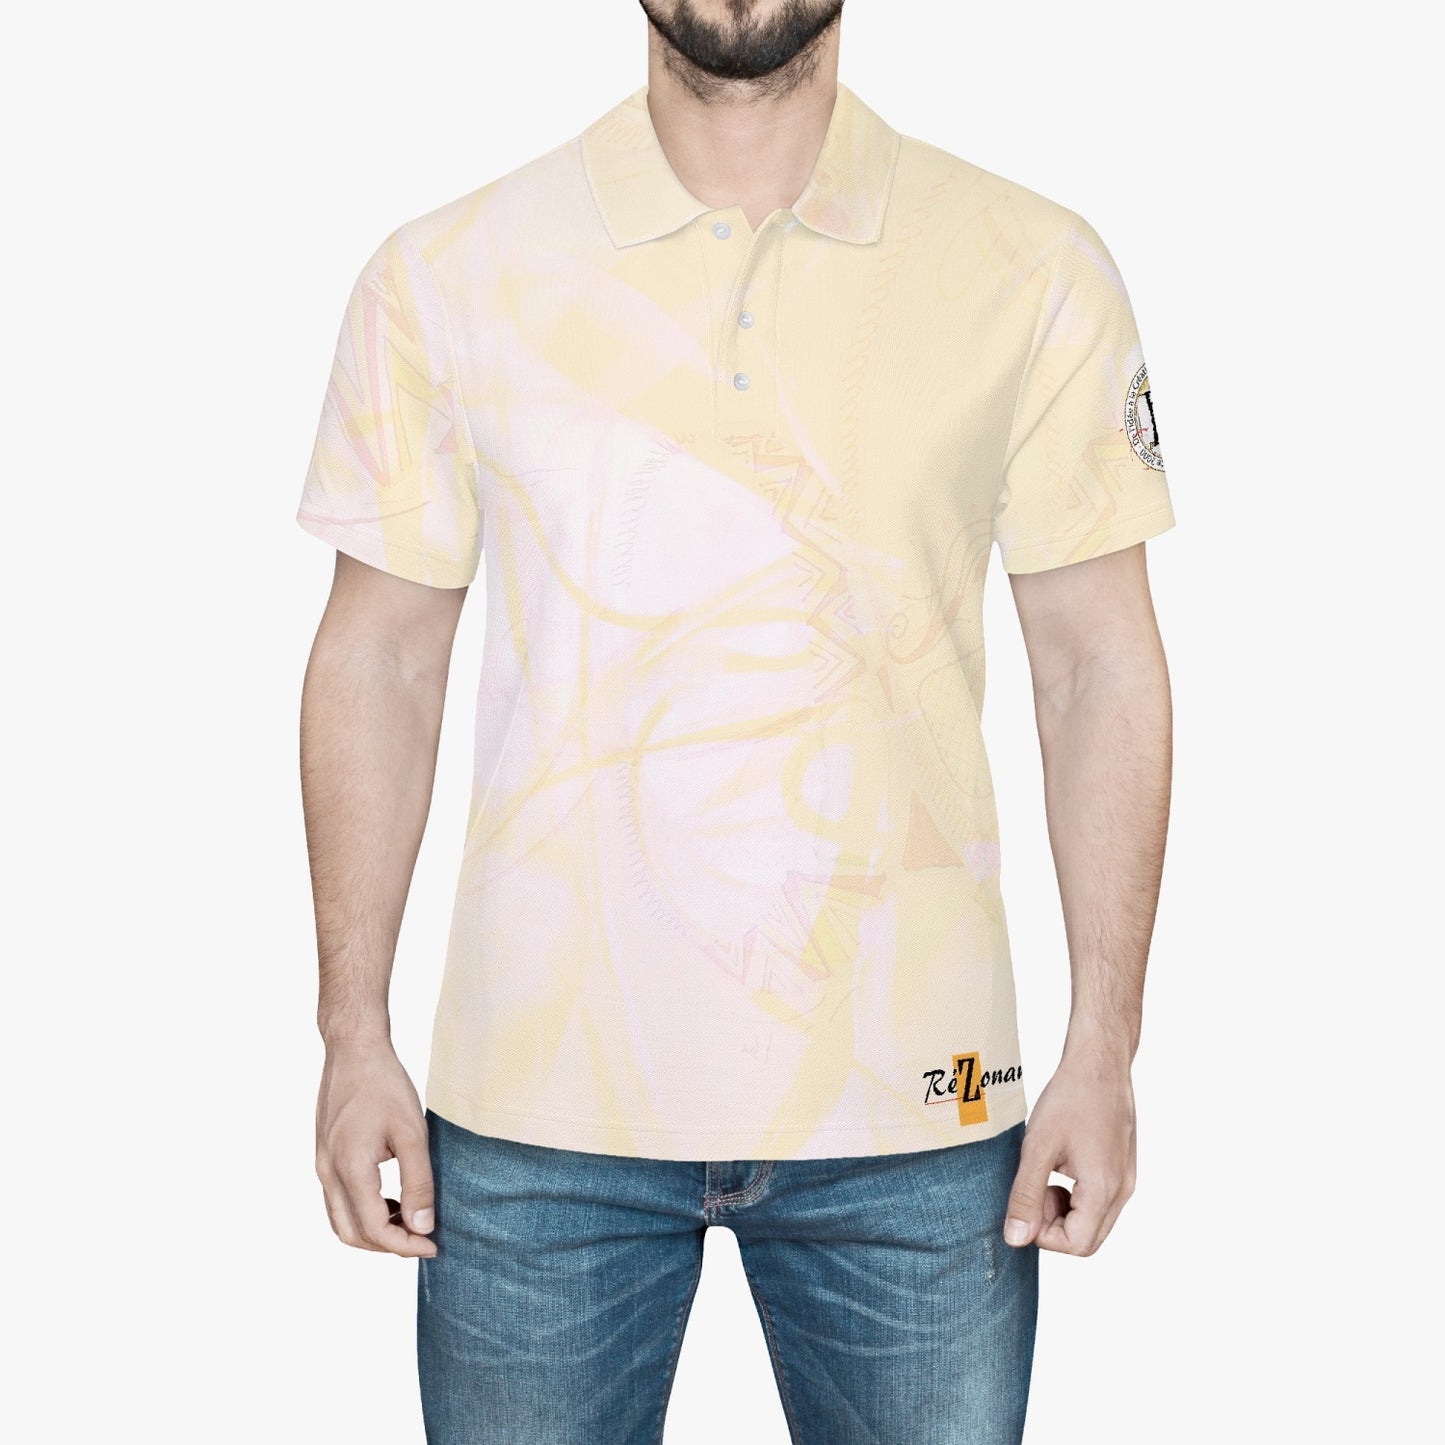 "Mixone" all-over polo shirt